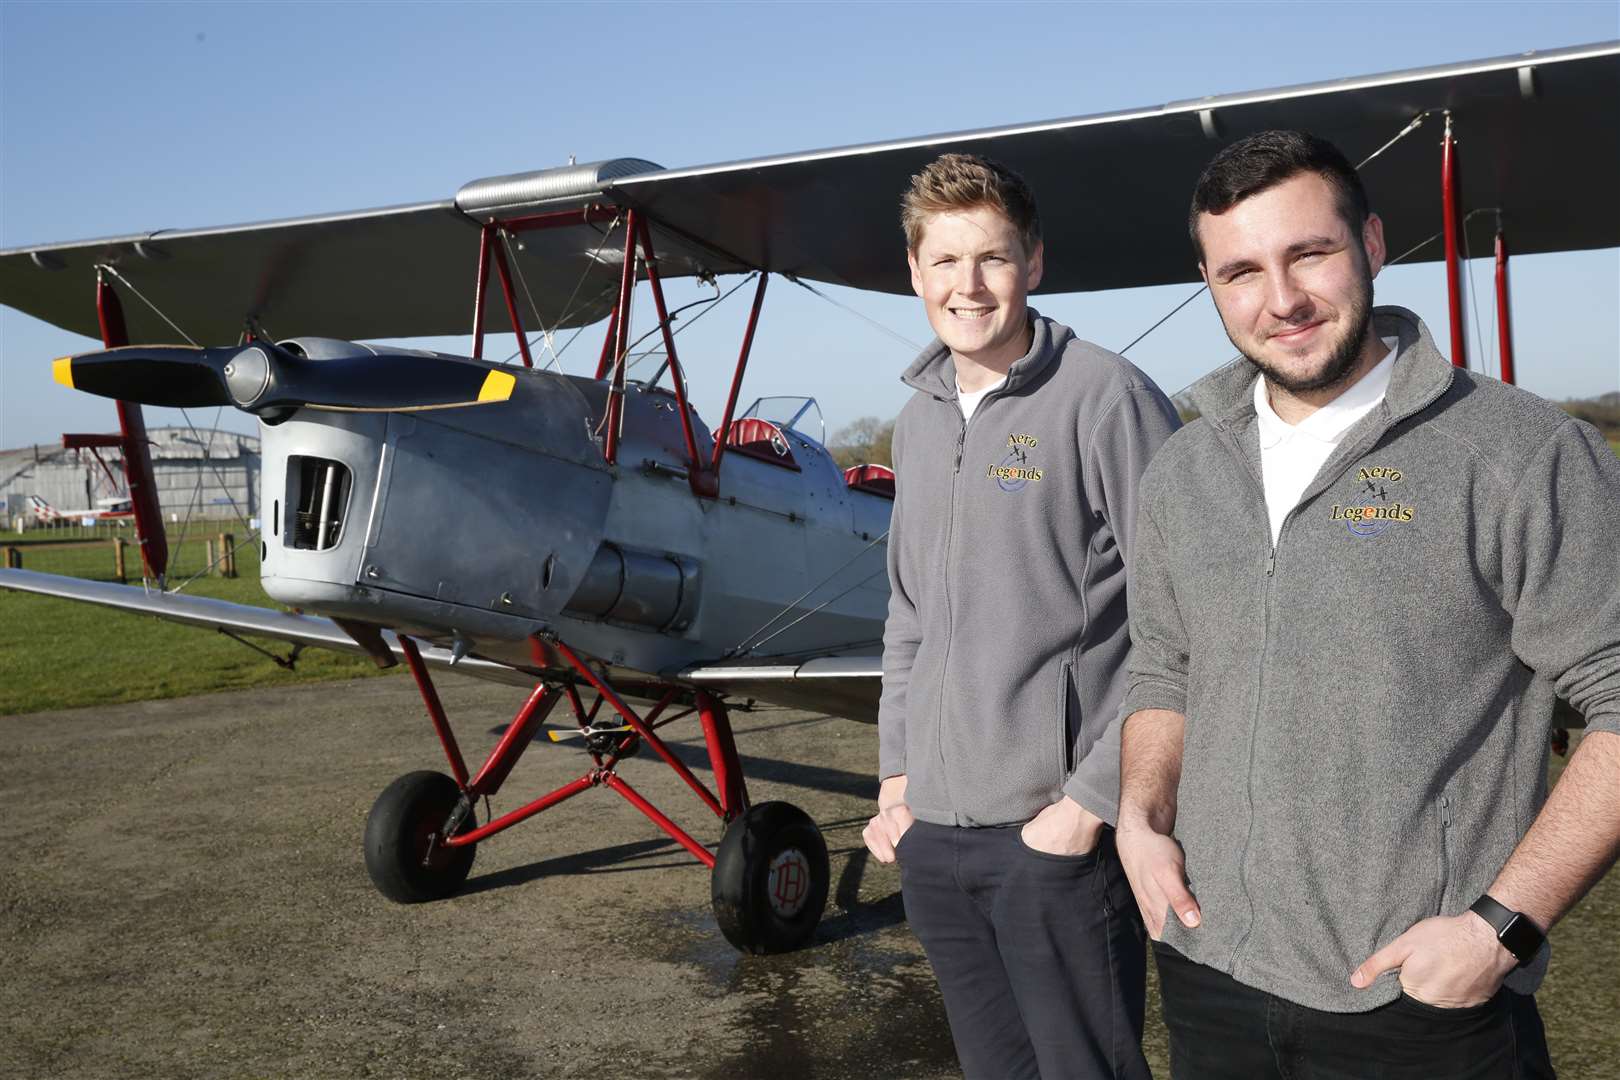 Elliot Styles and Ben Perkins. Aero Legends are asking people interested in vintage aircraft volunteer in exchange for free flights and lessons in their aircraft